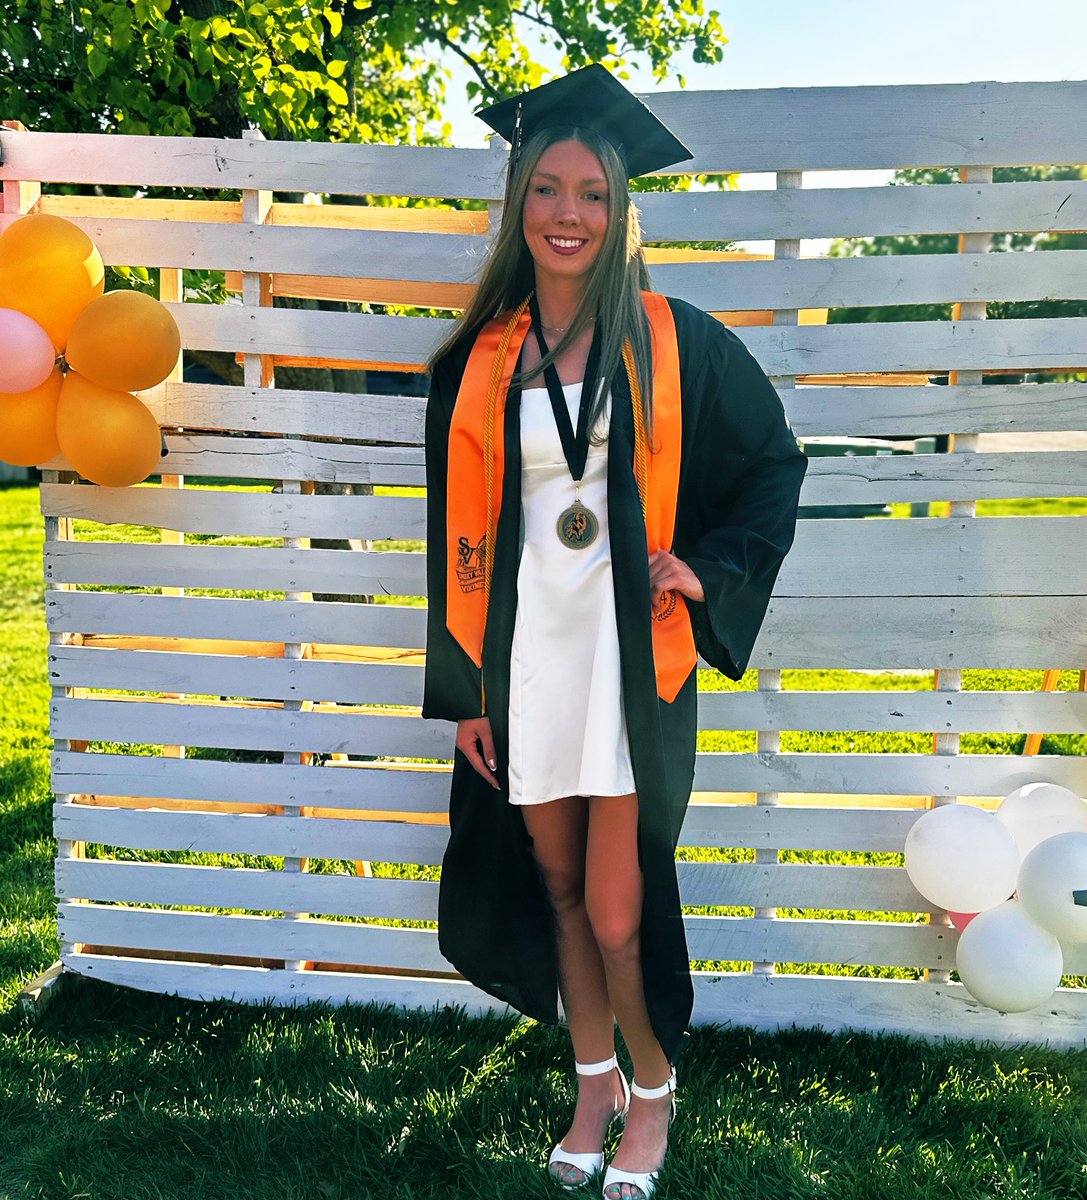 We are so proud of you @therealhope3 ! Your career at @USD400SVHS was a great one! Graduating with highest honors, setting several school records in VB, and selected all state in both VB and Track! 🧡 Spread those wings and aim high! 🫶 🐯#defendthefort